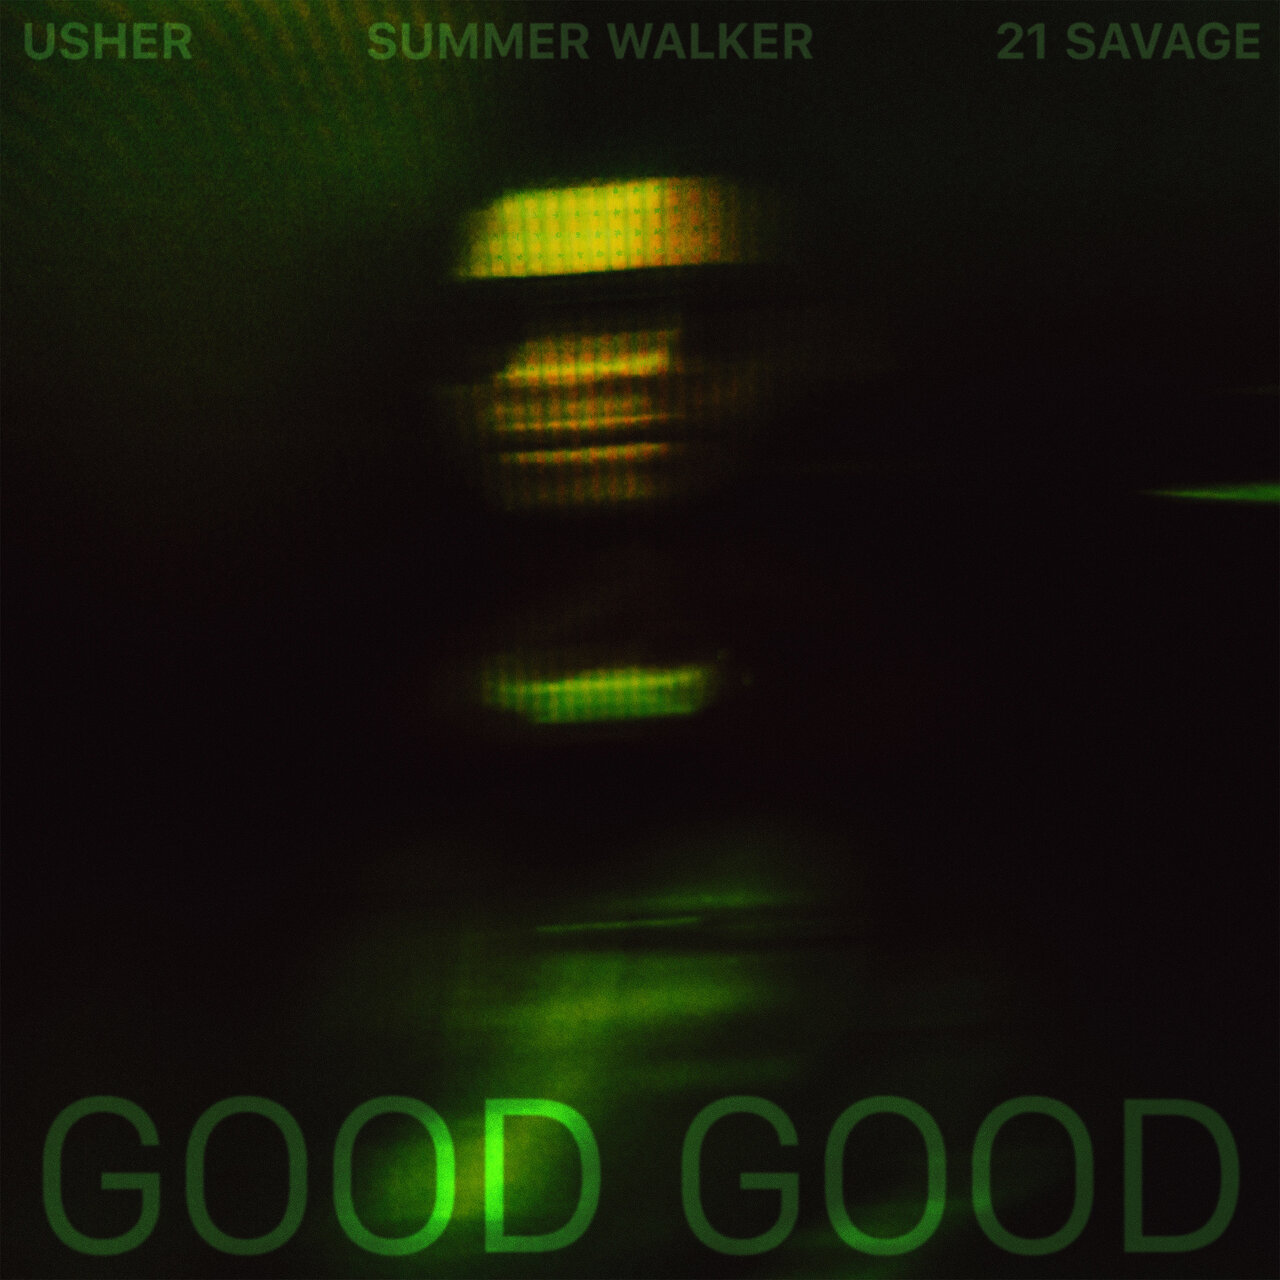 Usher - Good Good (ft. Summer Walker and 21 Savage) (Cover)